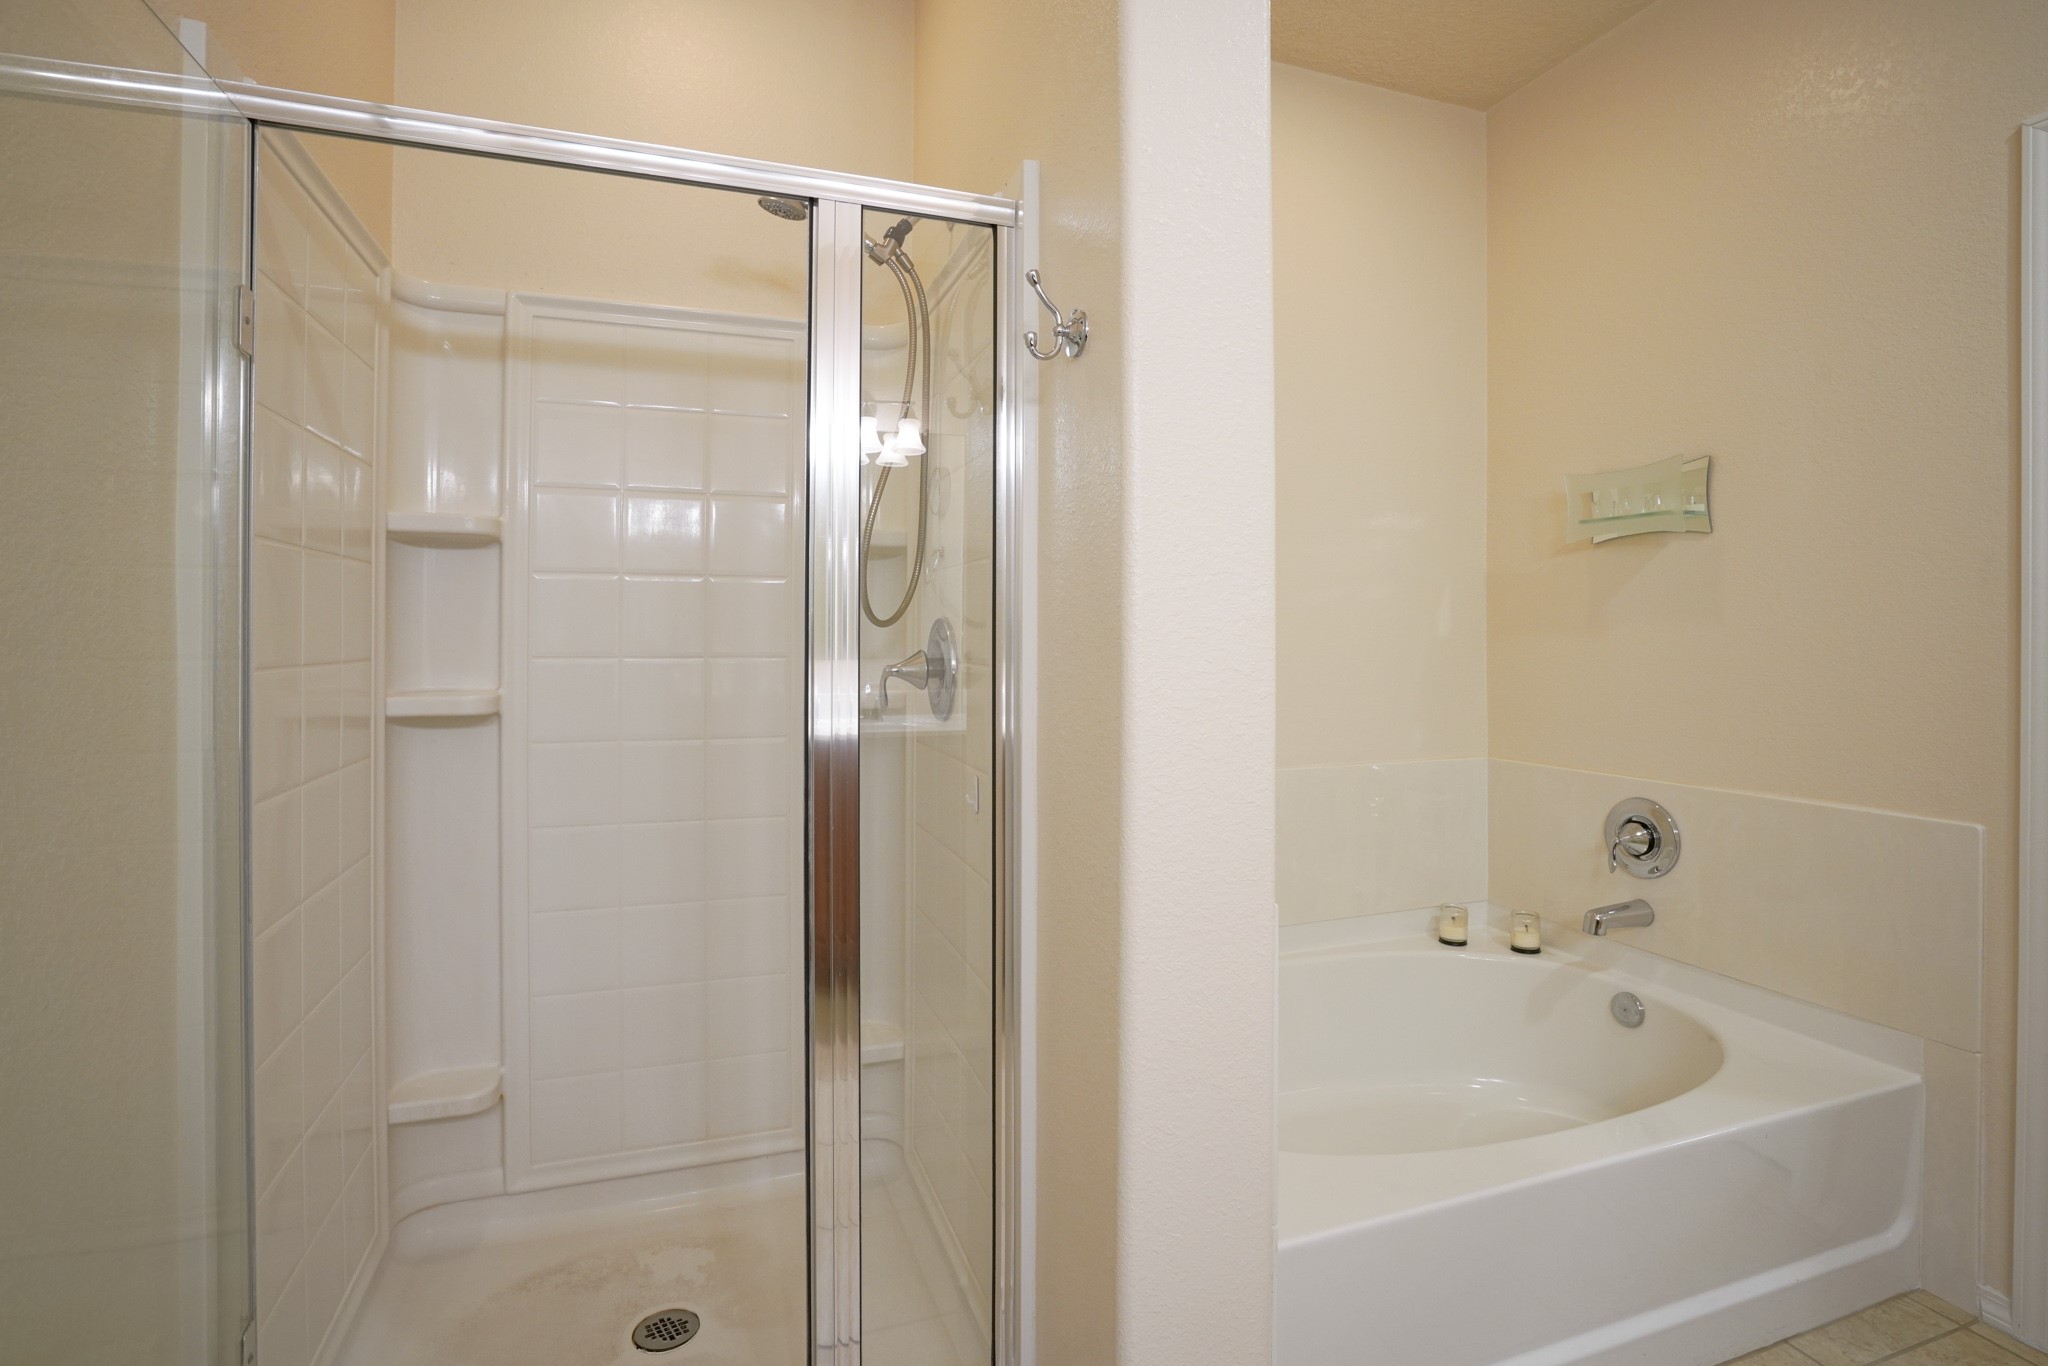 Primary shower and garden tub